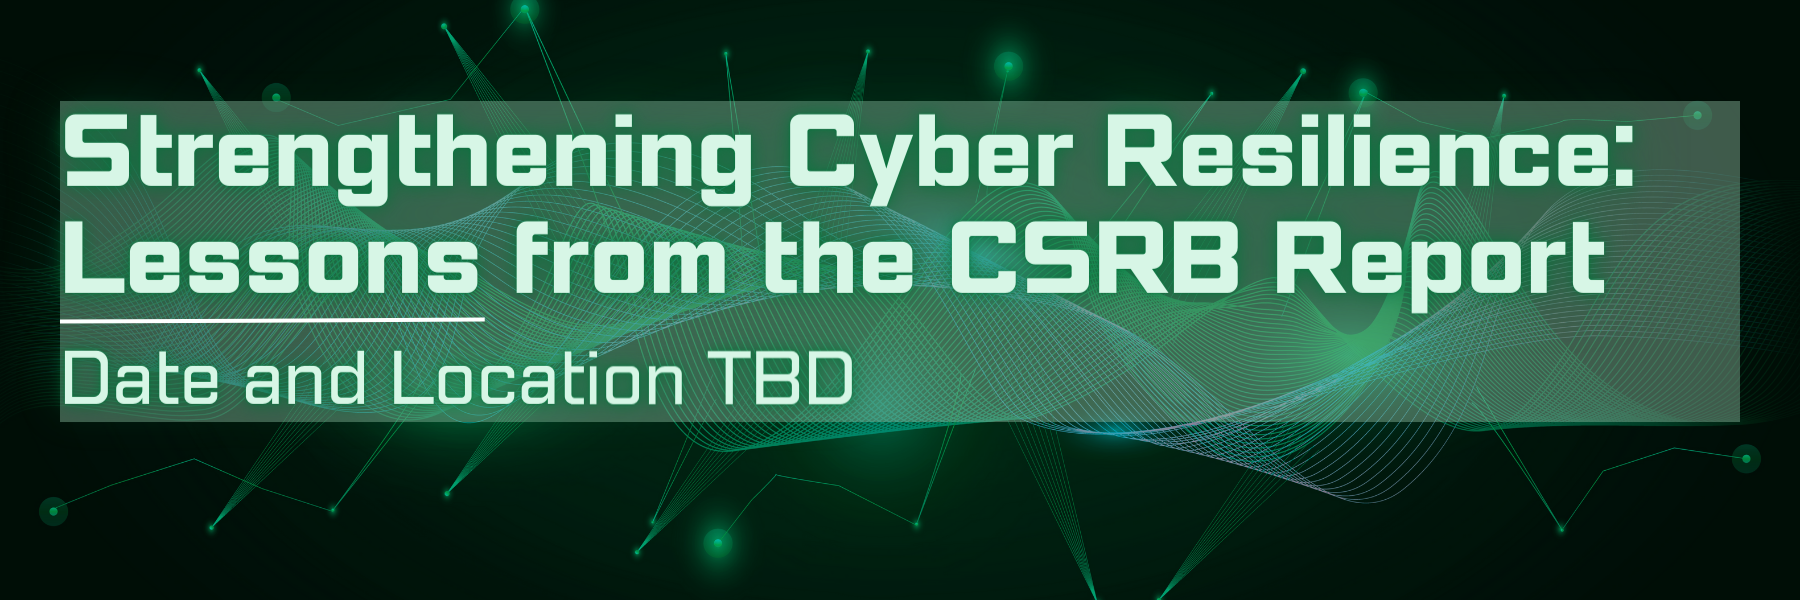 Strengthening Cyber Resilience: Lessons from the CSRB Report